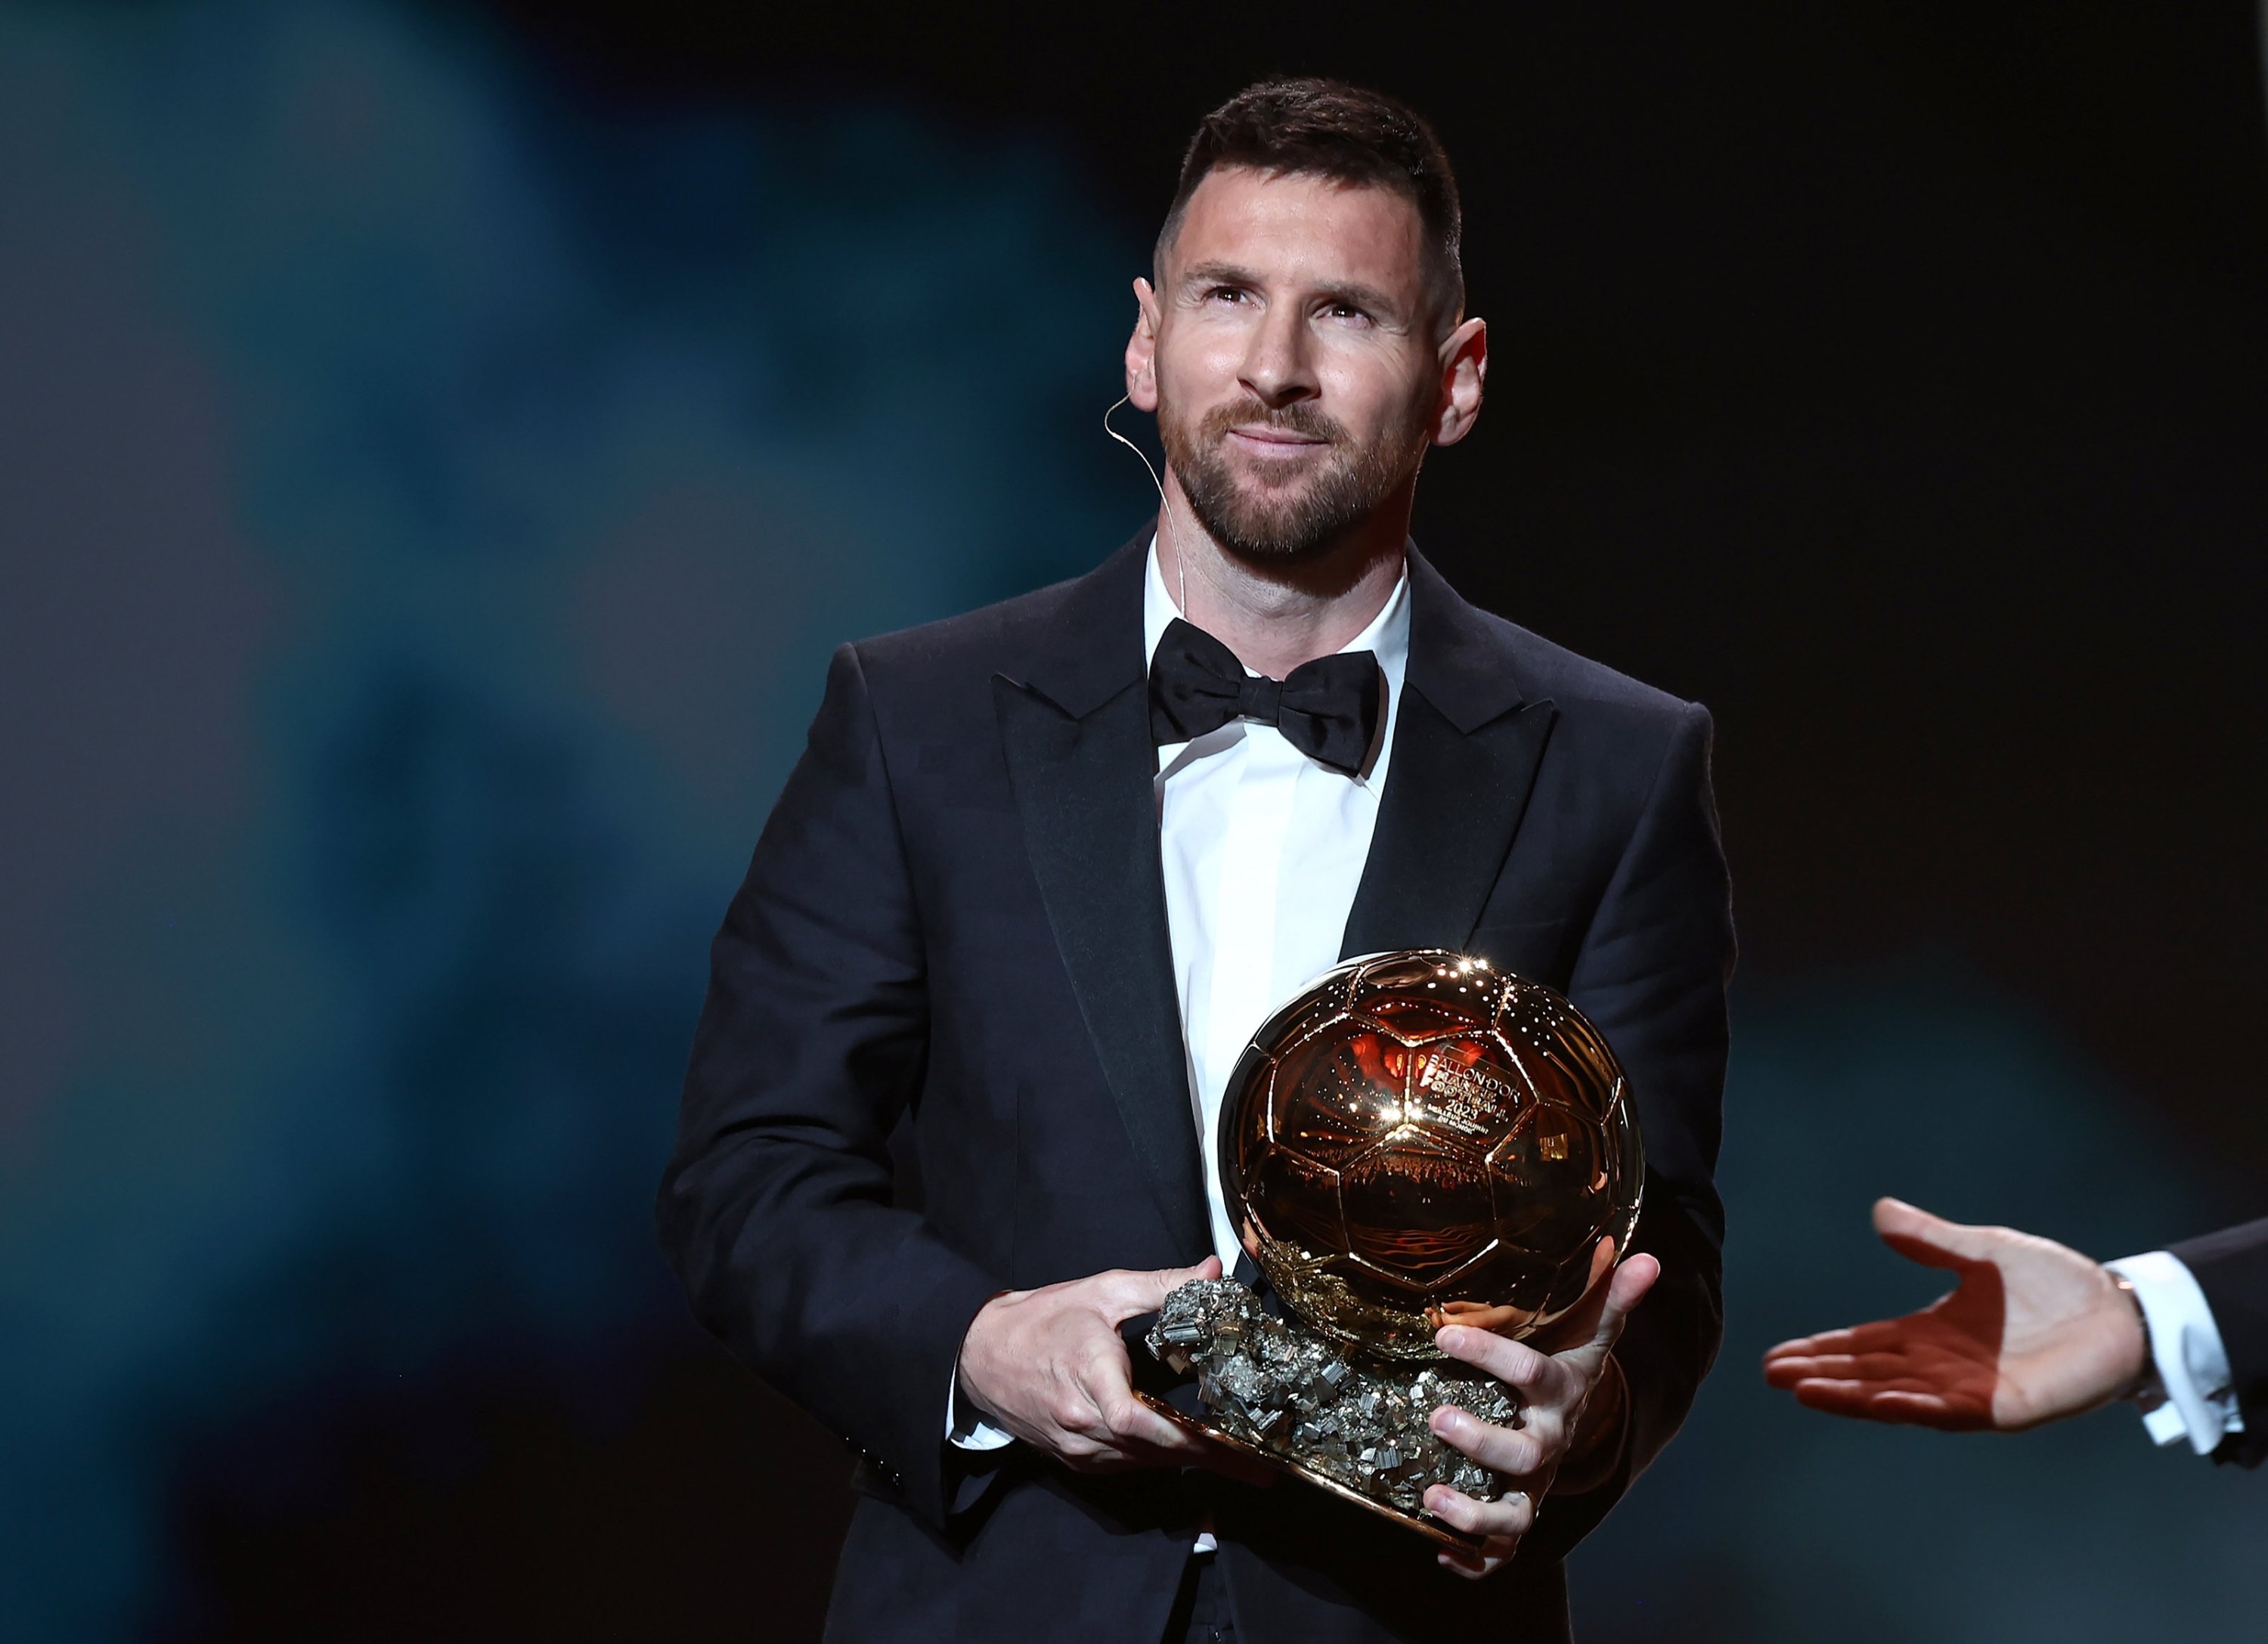 GOAT status sealed: Messi clinches record-extending 8th Ballon d'Or